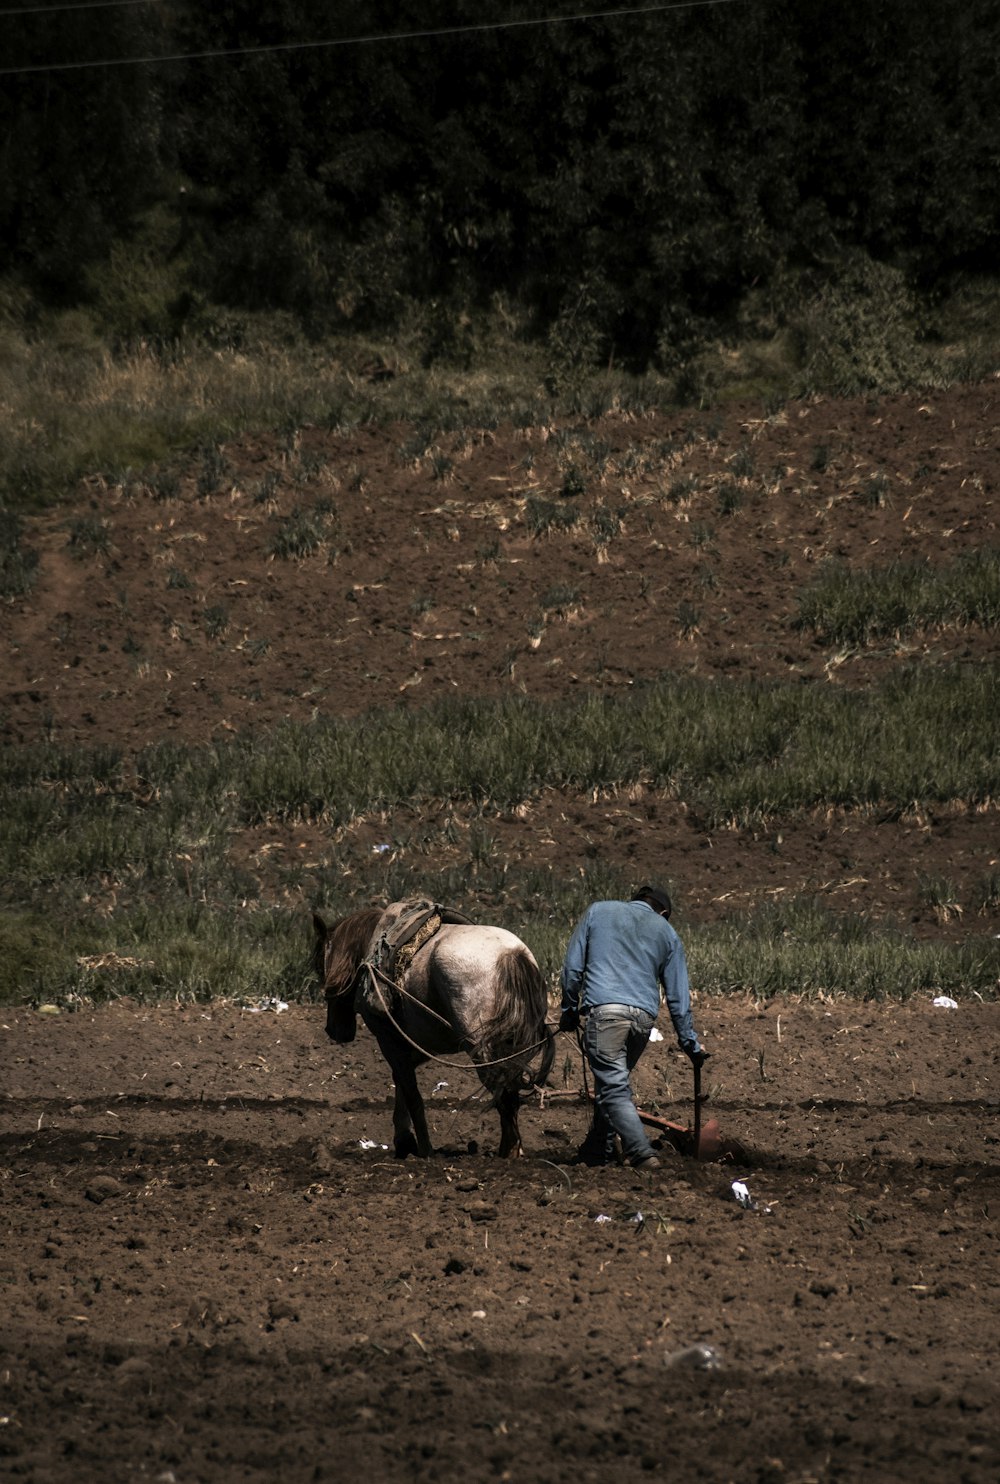 a man plowing a field with two horses